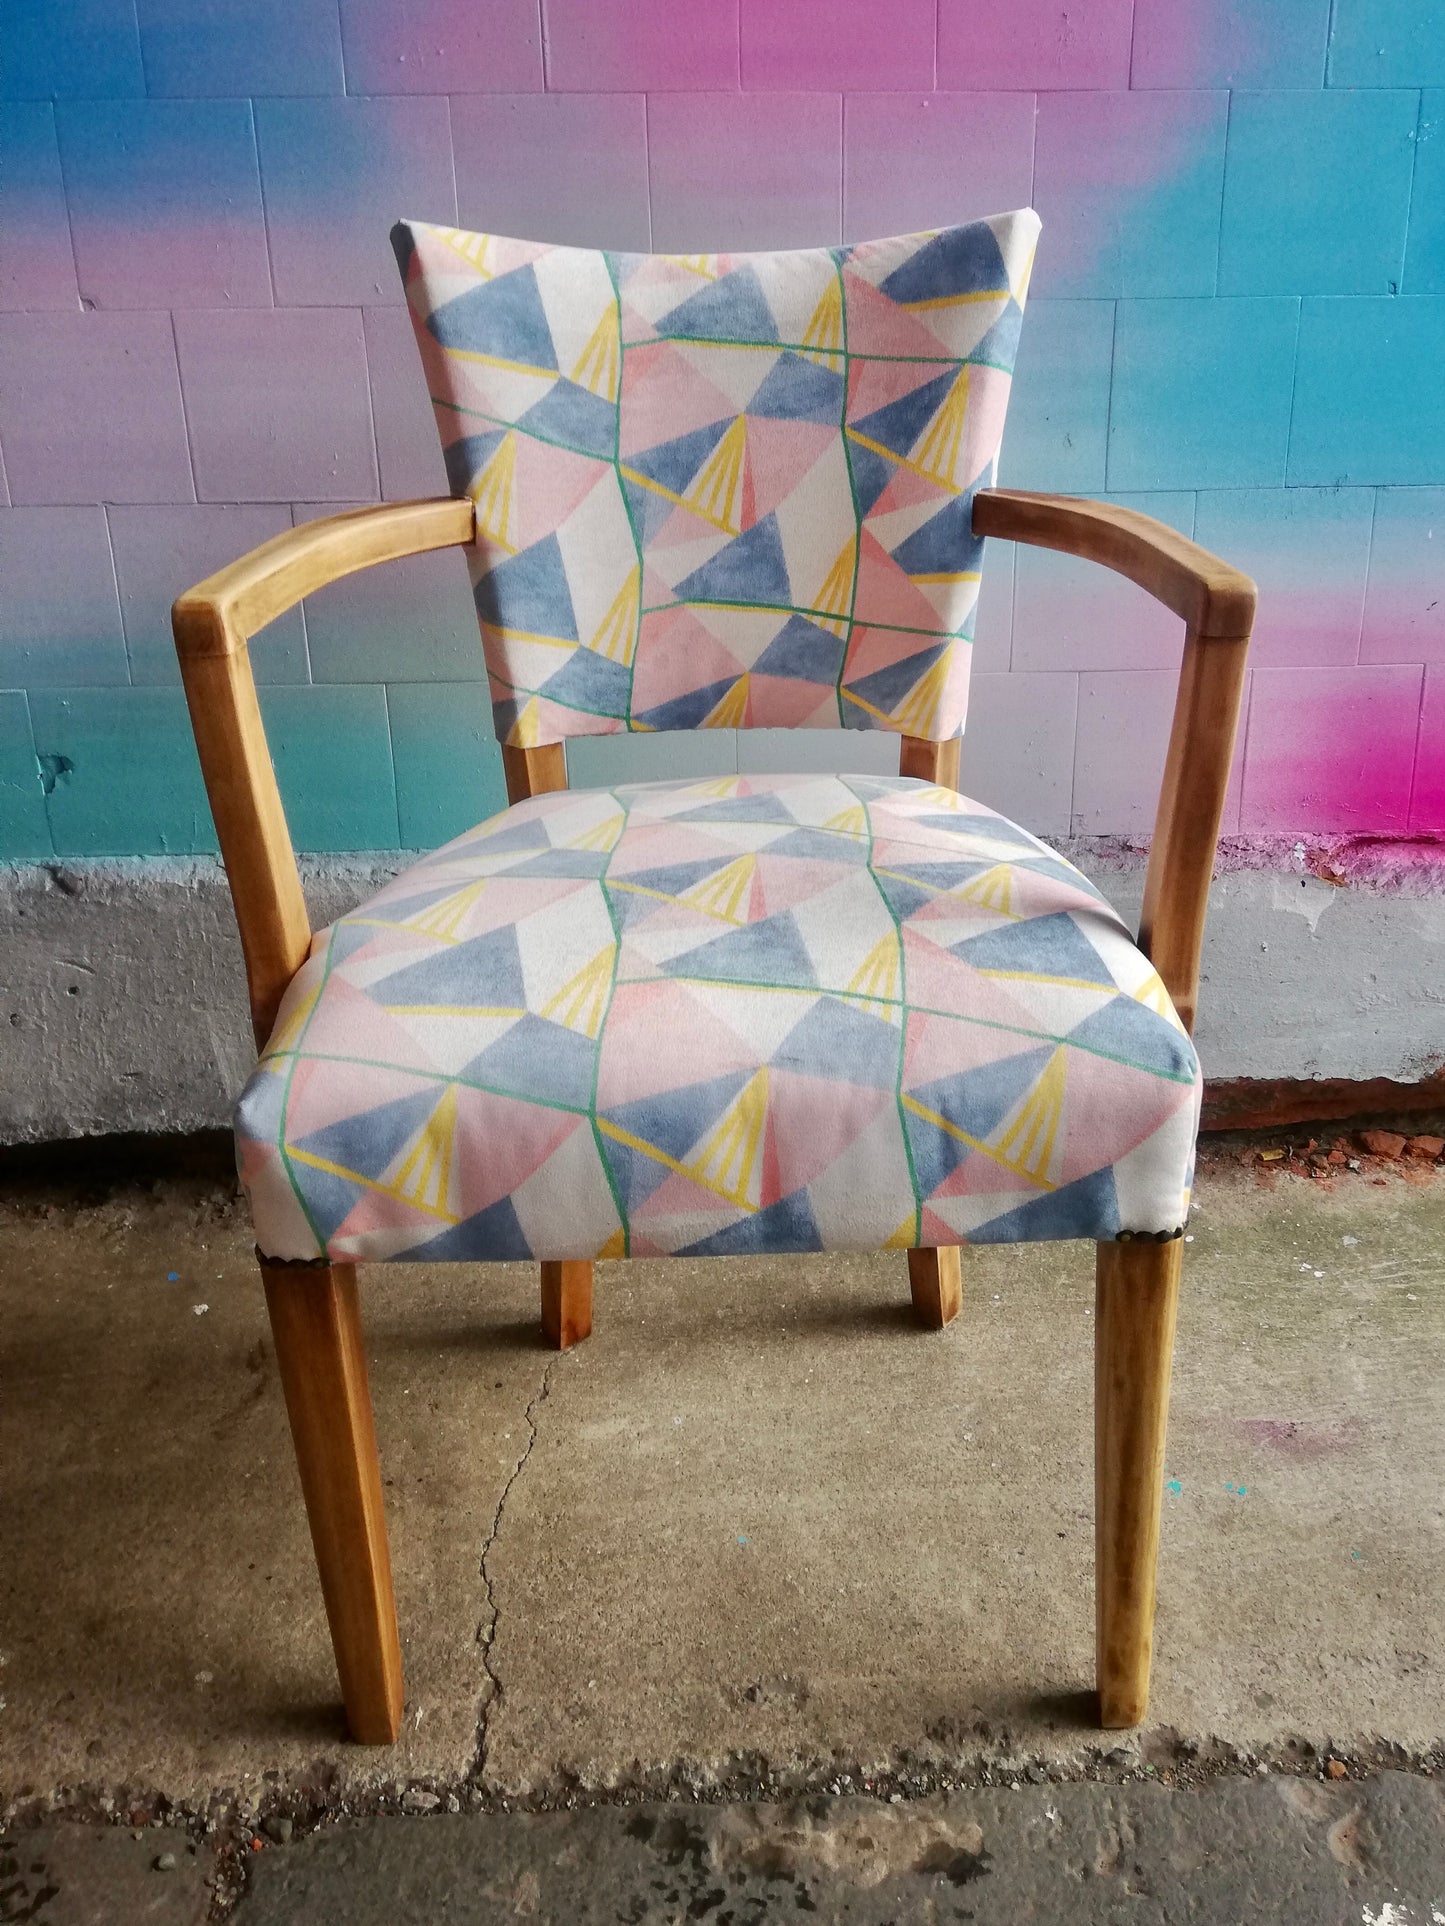 Vintage Art Deco chair fully reupholstered